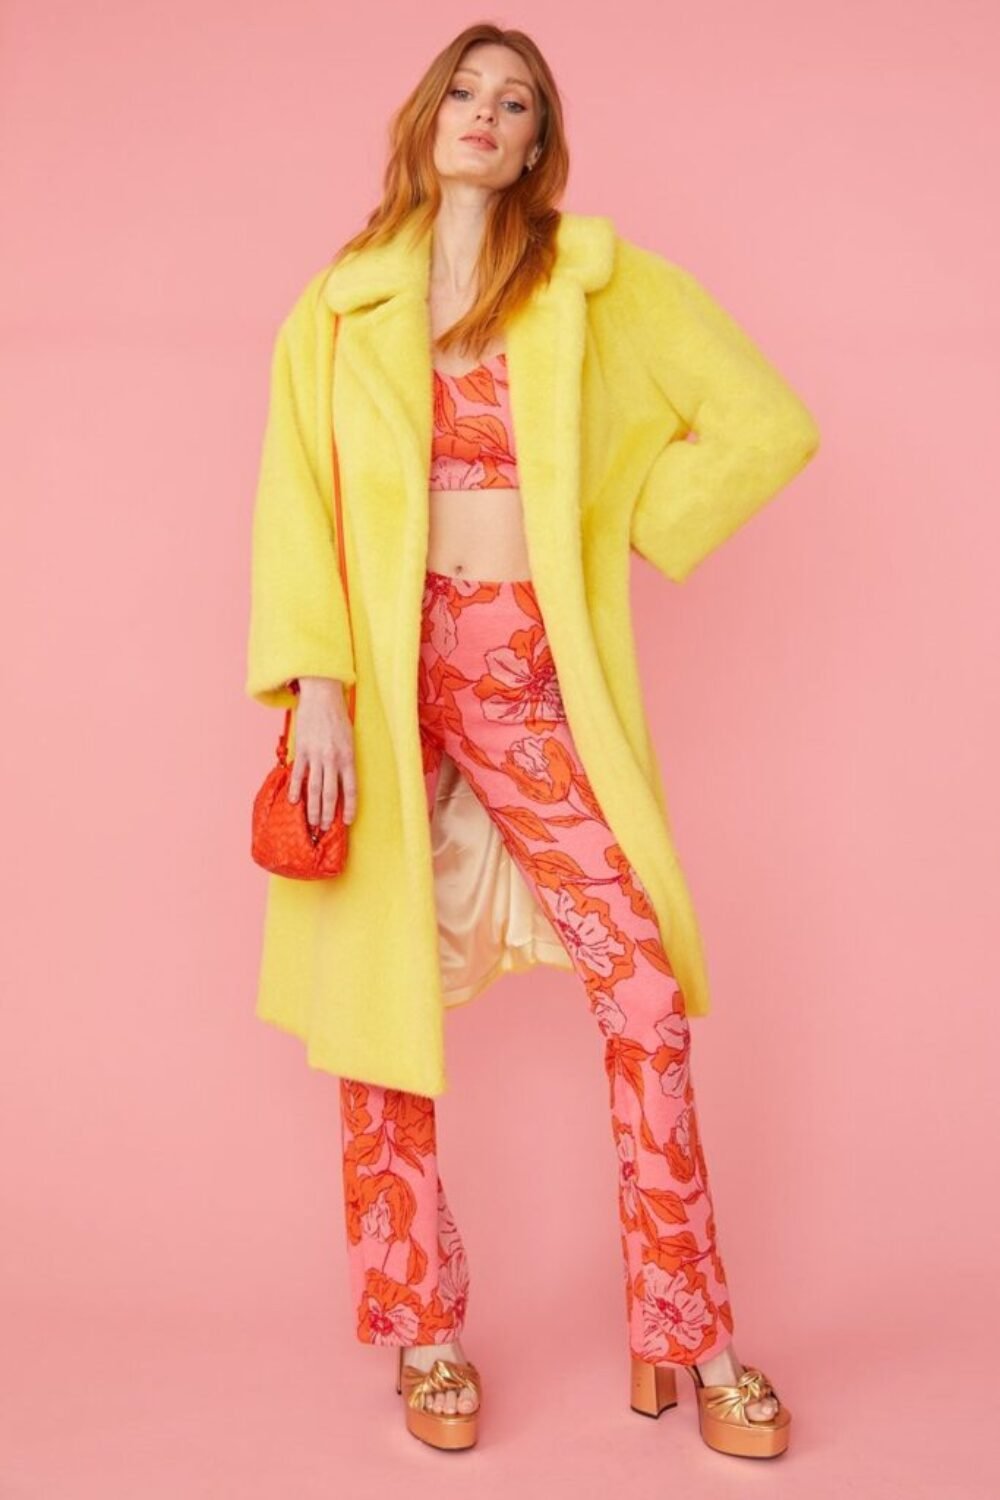 Shop Lux Yellow Faux Fur Midi Coat and women's luxury and designer clothes at www.lux-apparel.co.uk